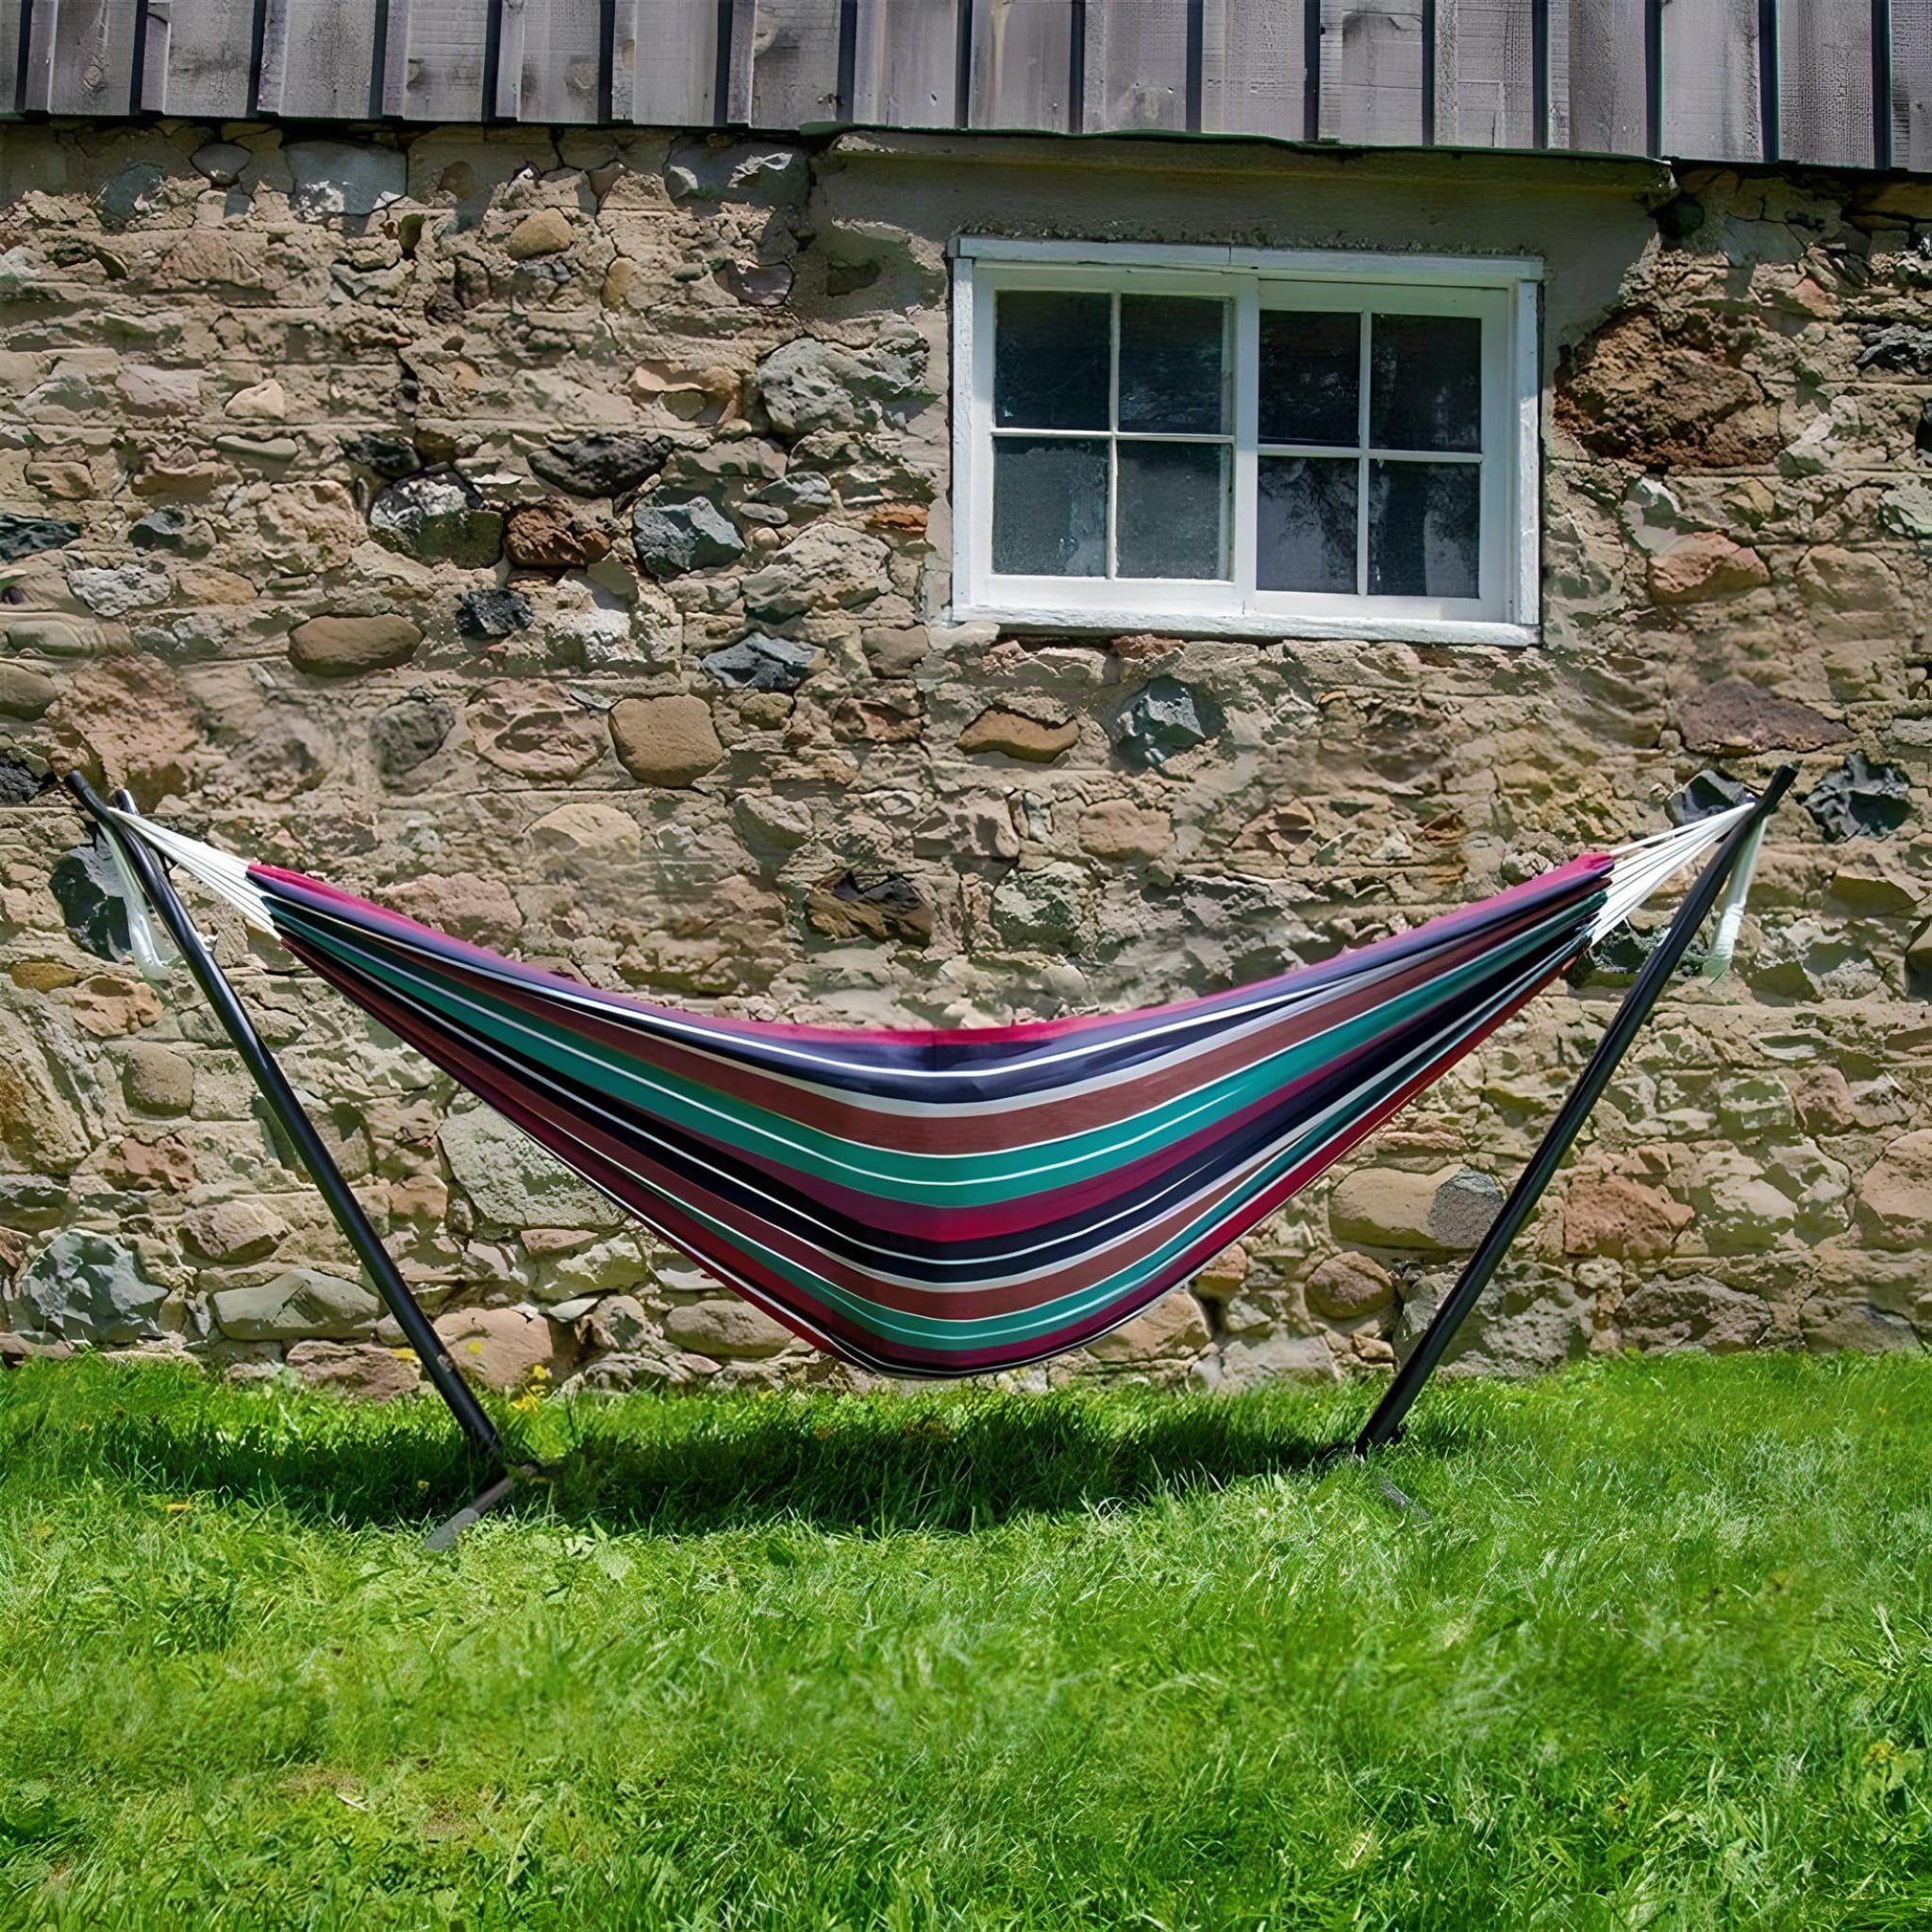    a-hammock-on-grass-large-bed